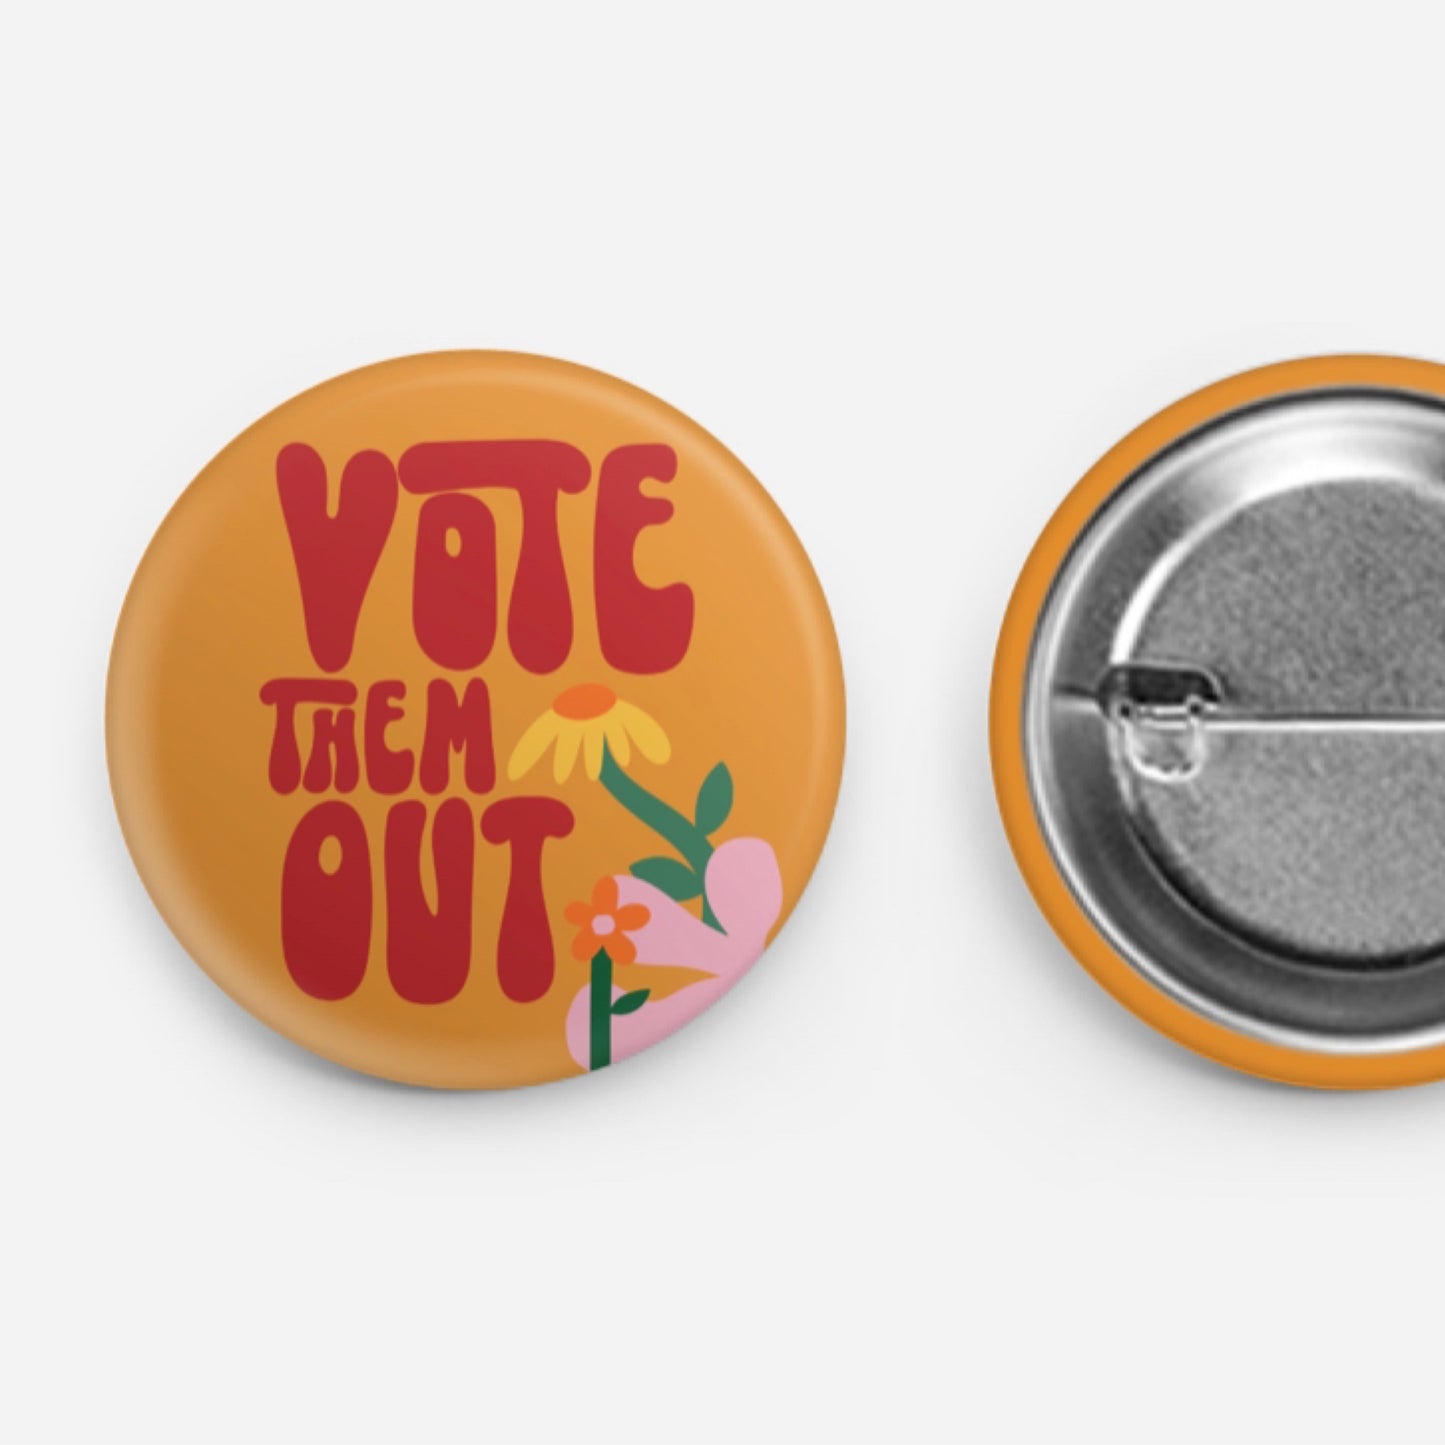 Vote them out button